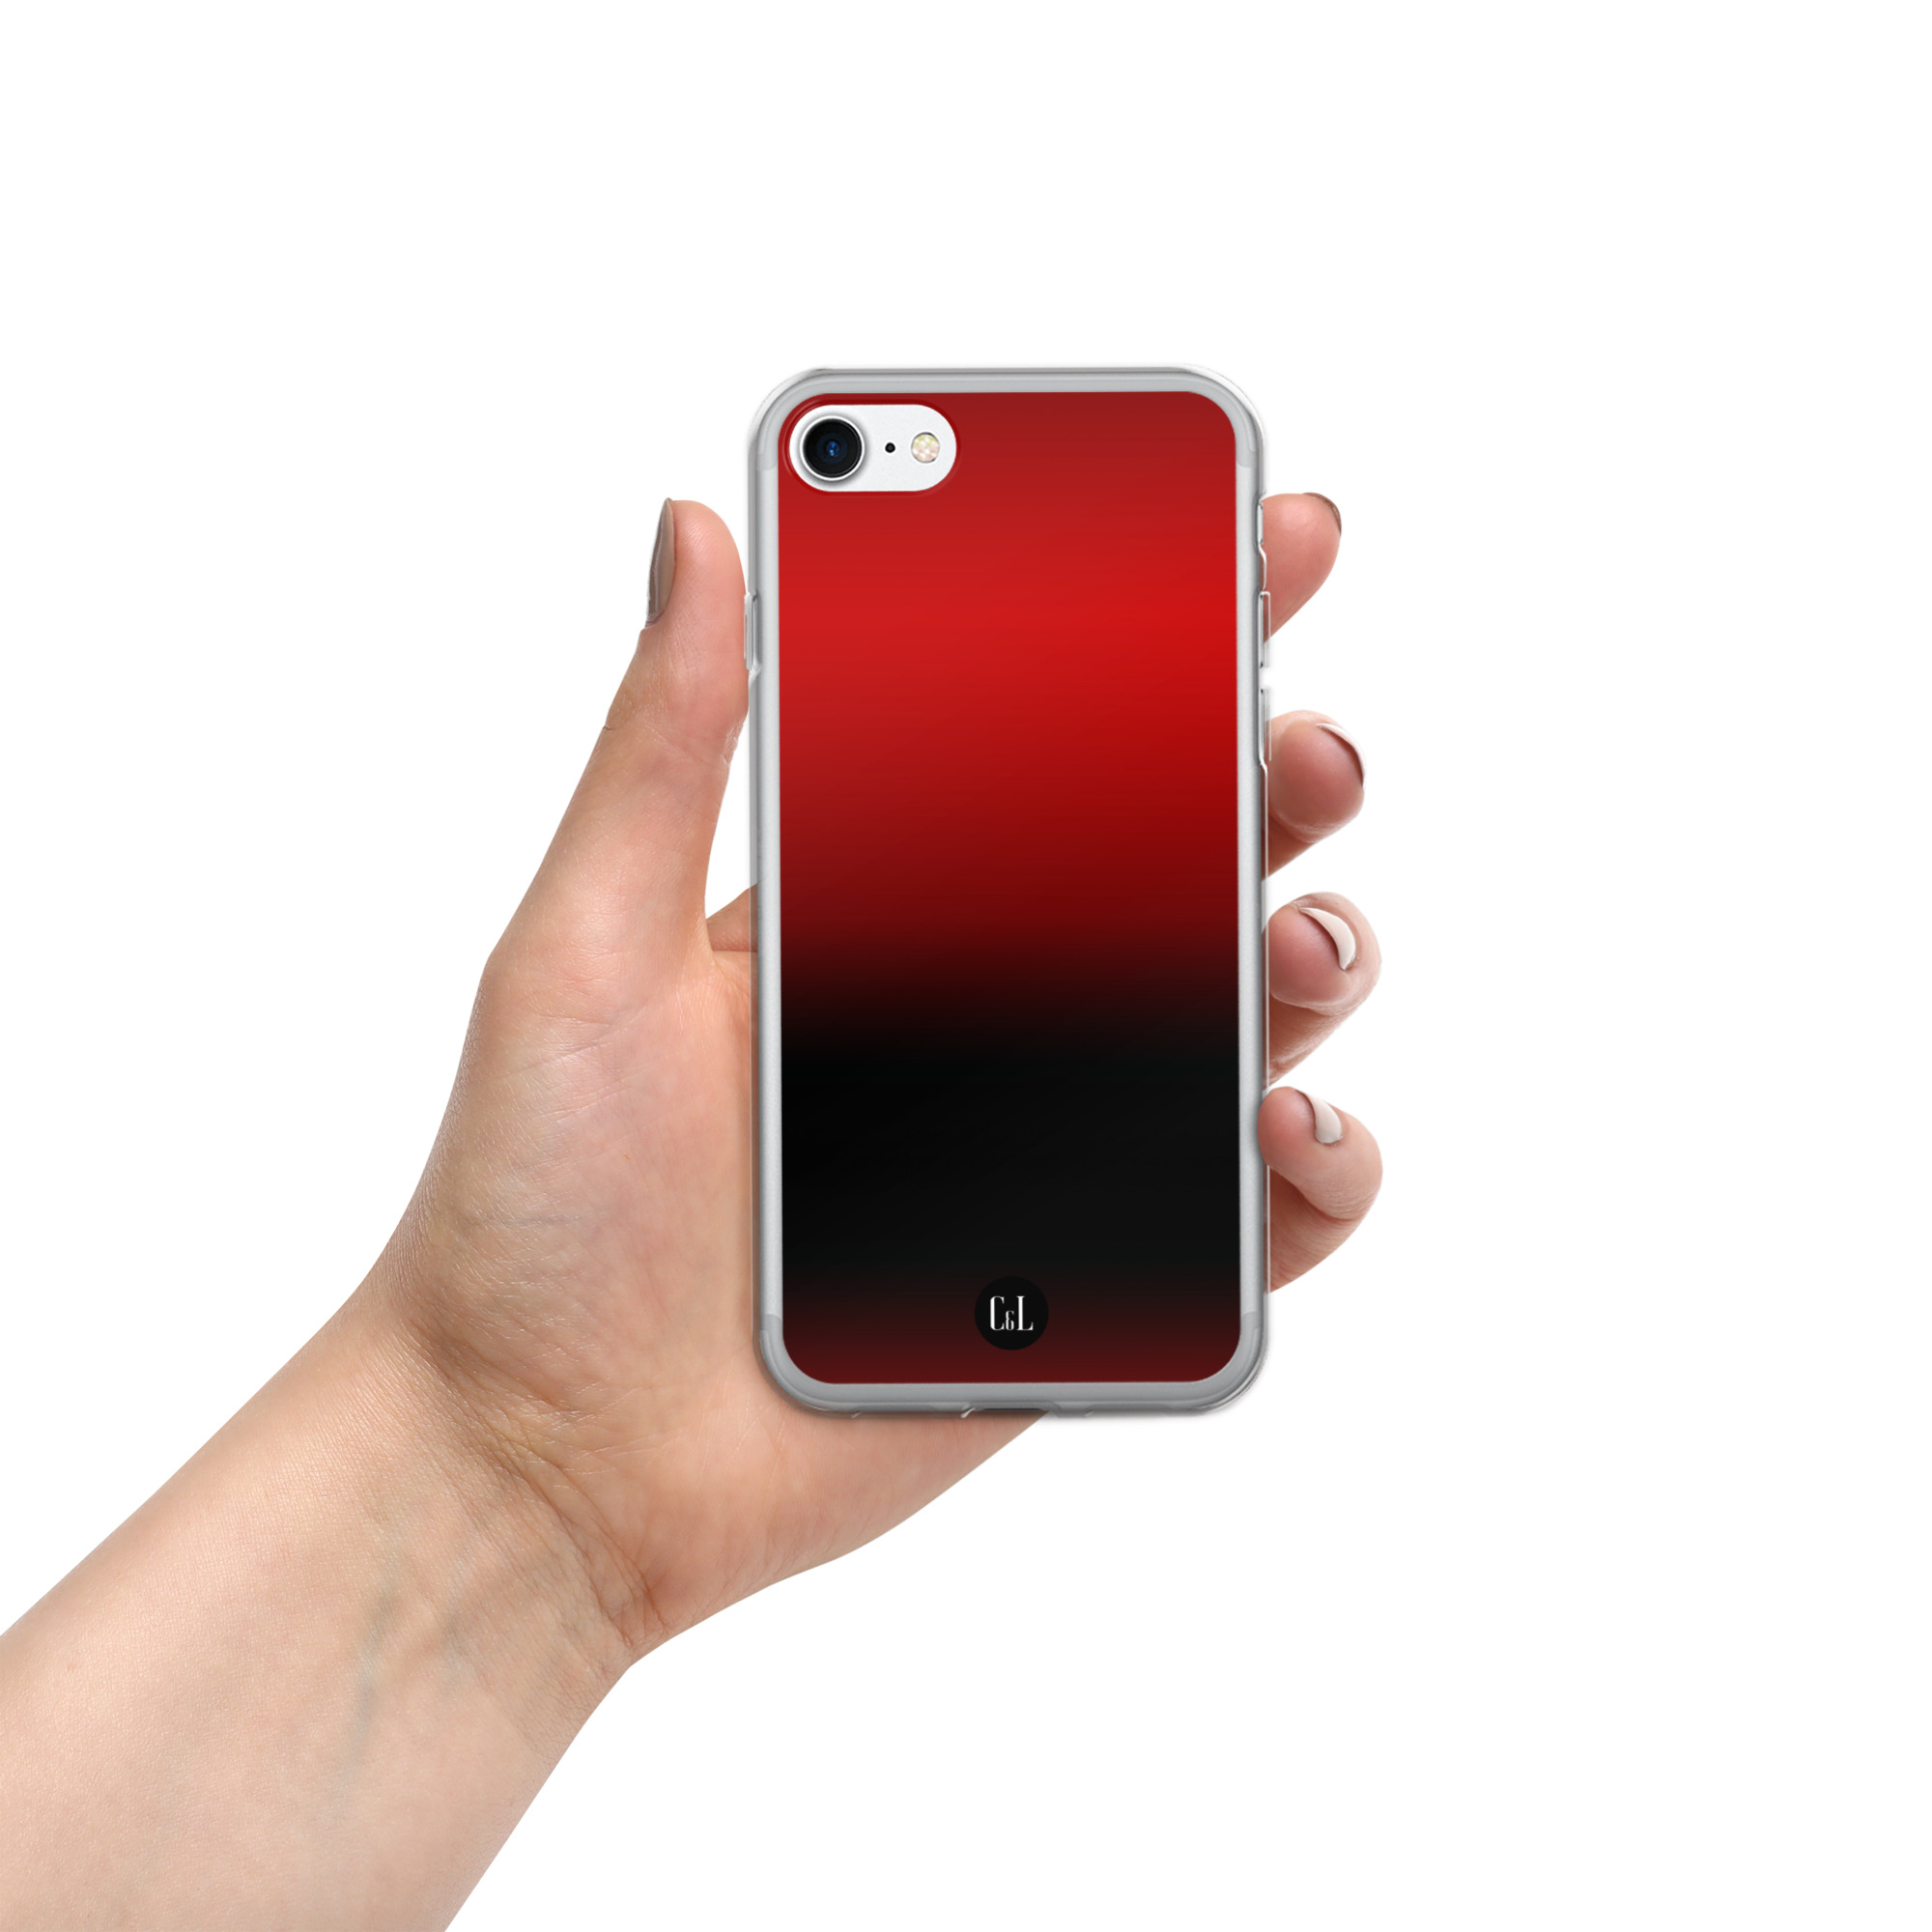 clear-case-for-iphone-iphone-se-case-on-phone-6482dcd192804.jpg